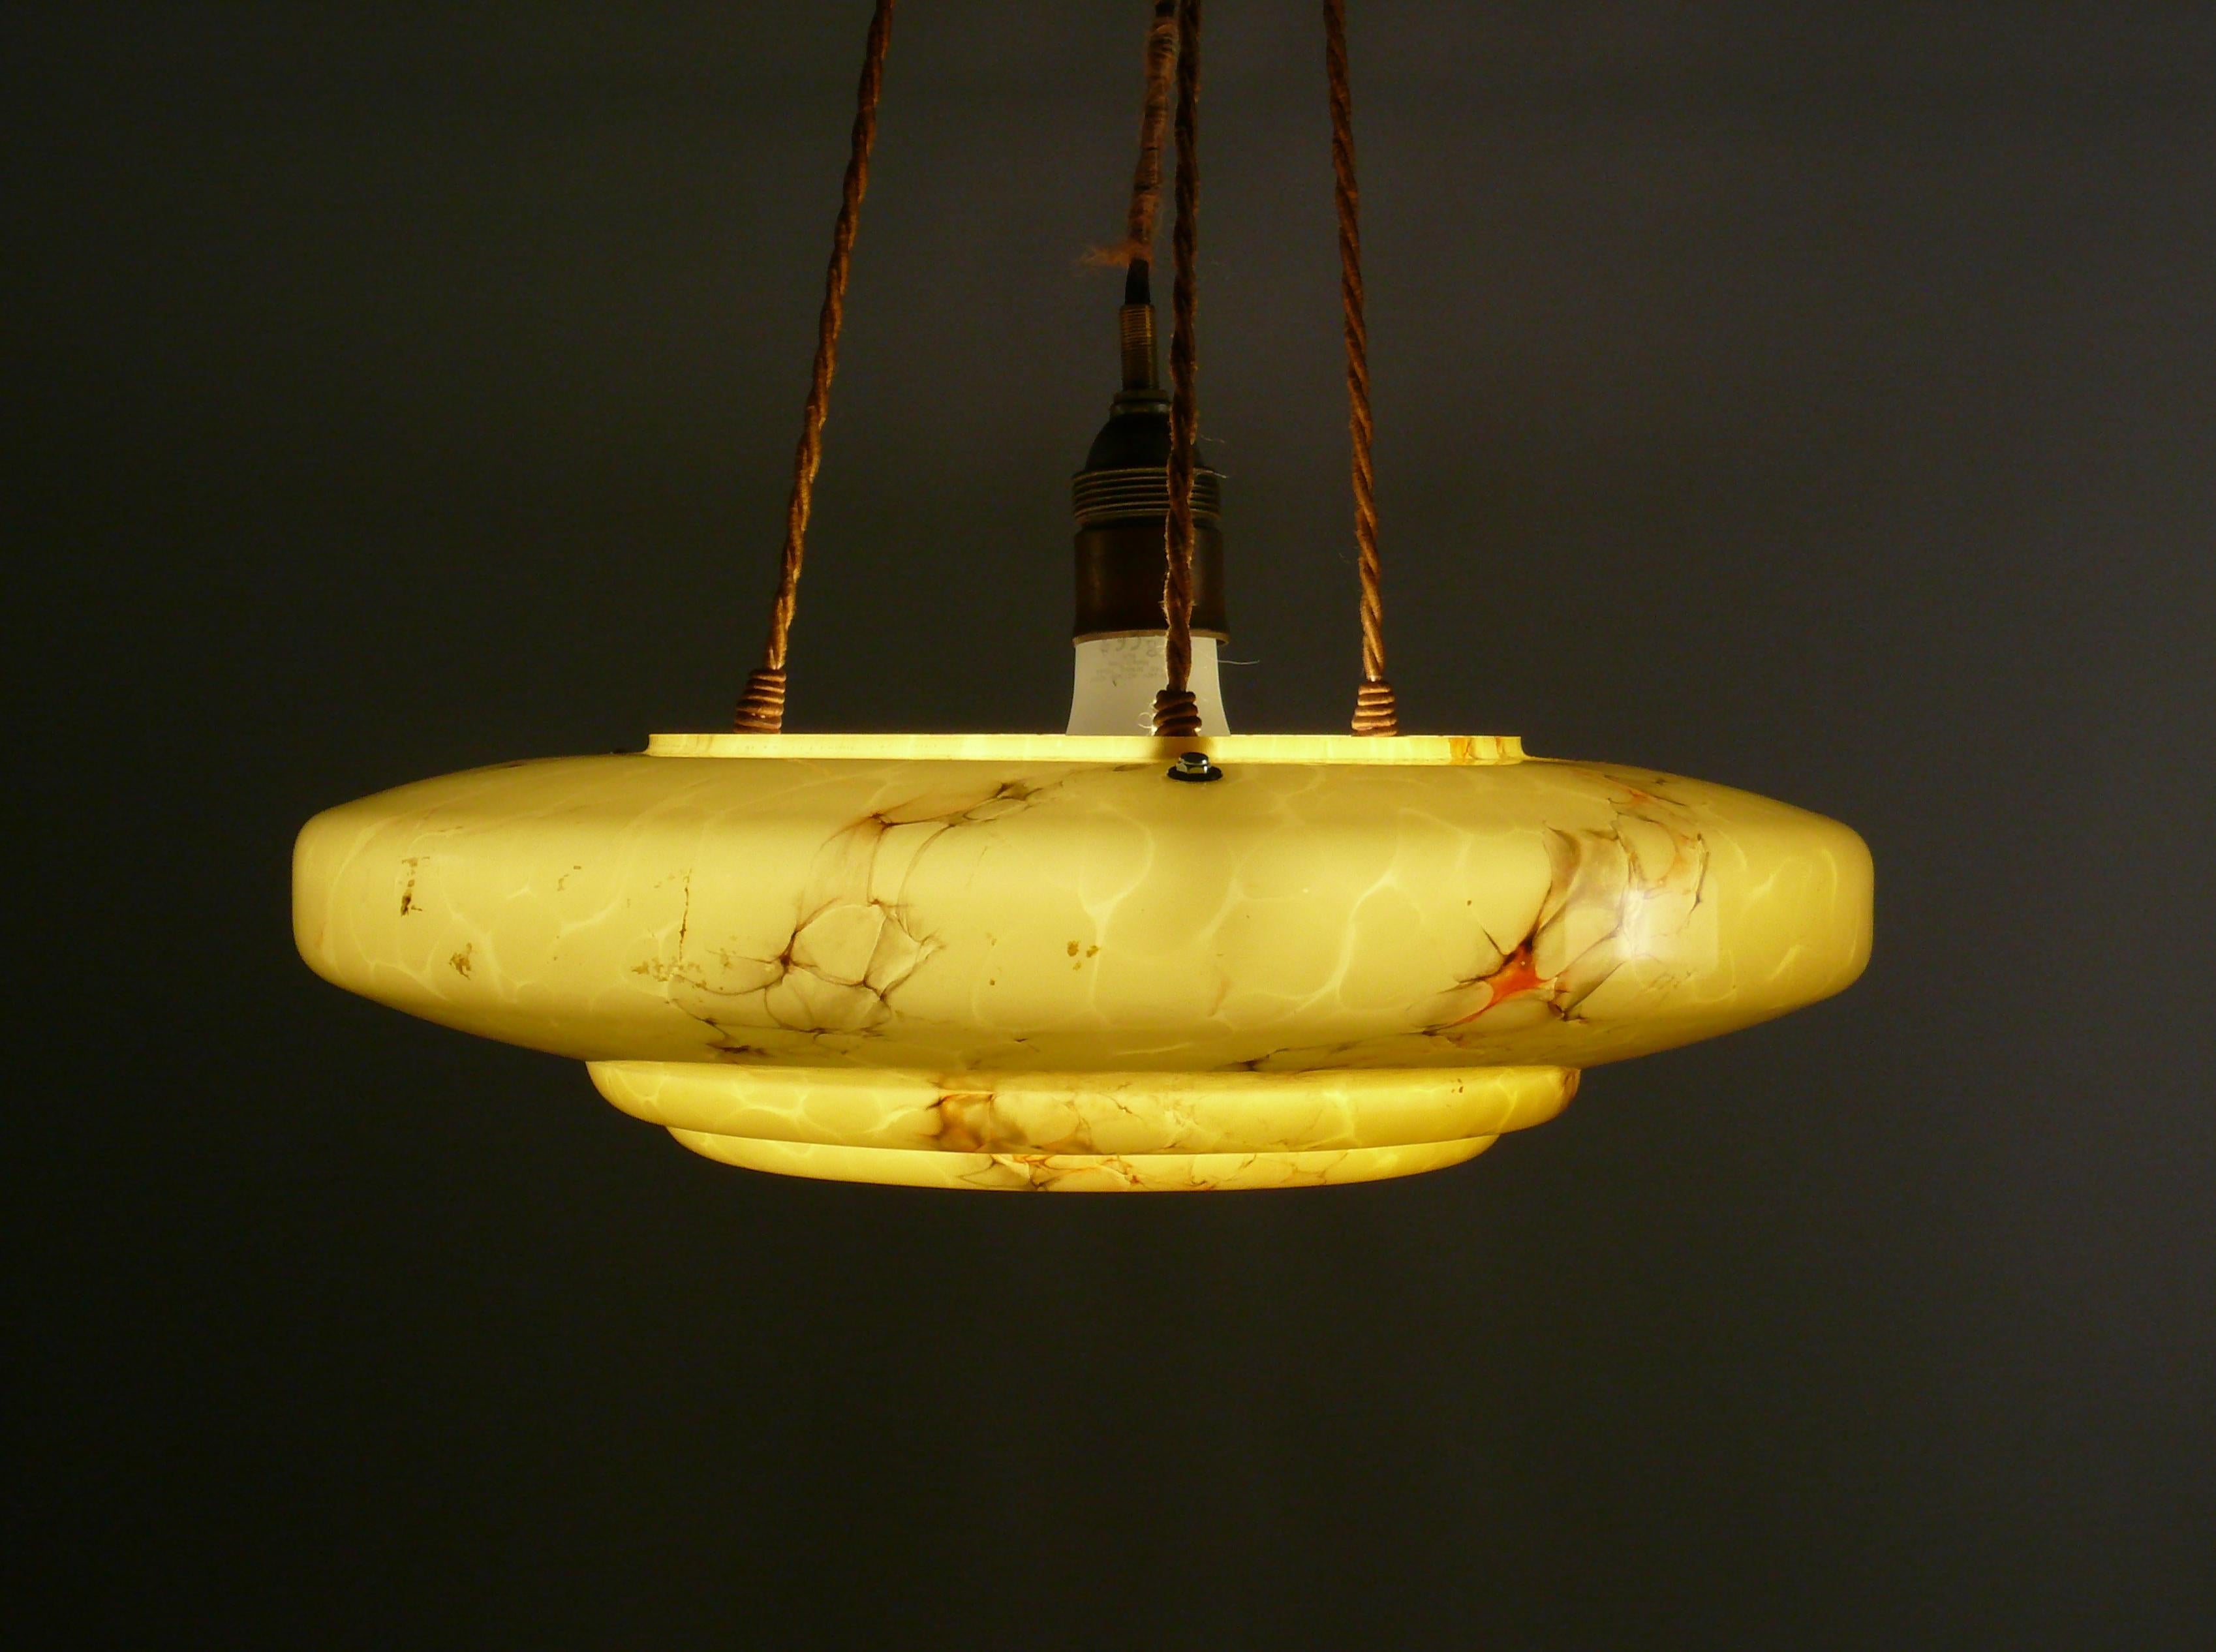 Large, very beautiful pendant lamp from the 1920s - 1940s with a marbled glass shade in the typical Art Deco design and in very good condition. The dark yellow glass shade has a very beautiful shape and subtle marbling. The glass is extremely thick